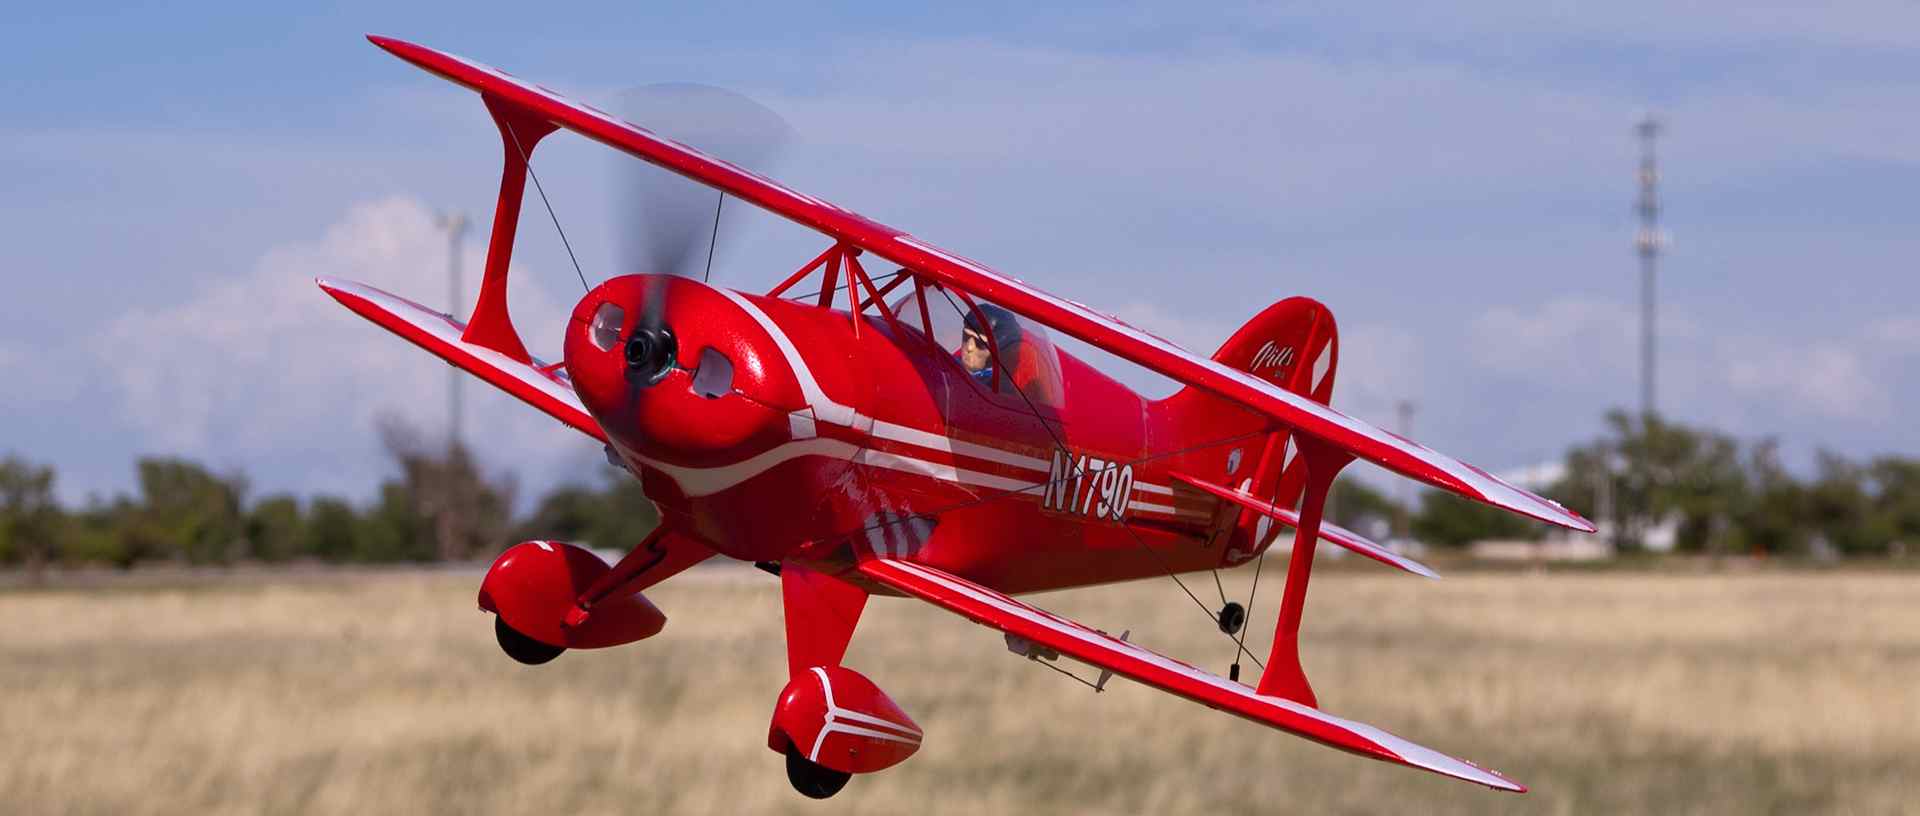 Micro Pitts S-1S AS3X BNF Basic